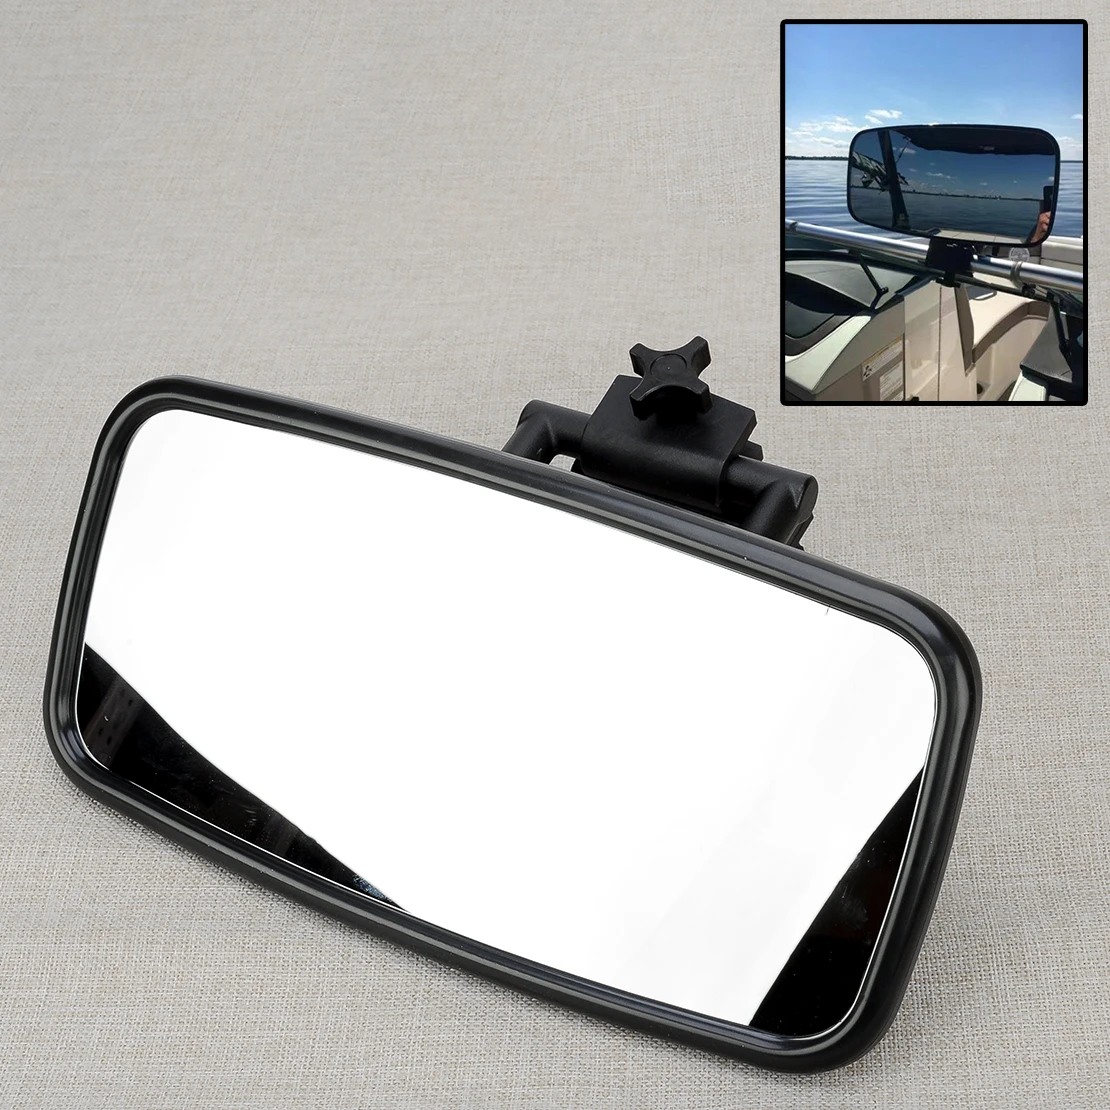 heavy-duty-7-x14-marine-rearview-mirror-with-mount-bracket-fit-for-ski-pontoon-boat-high-quality-new